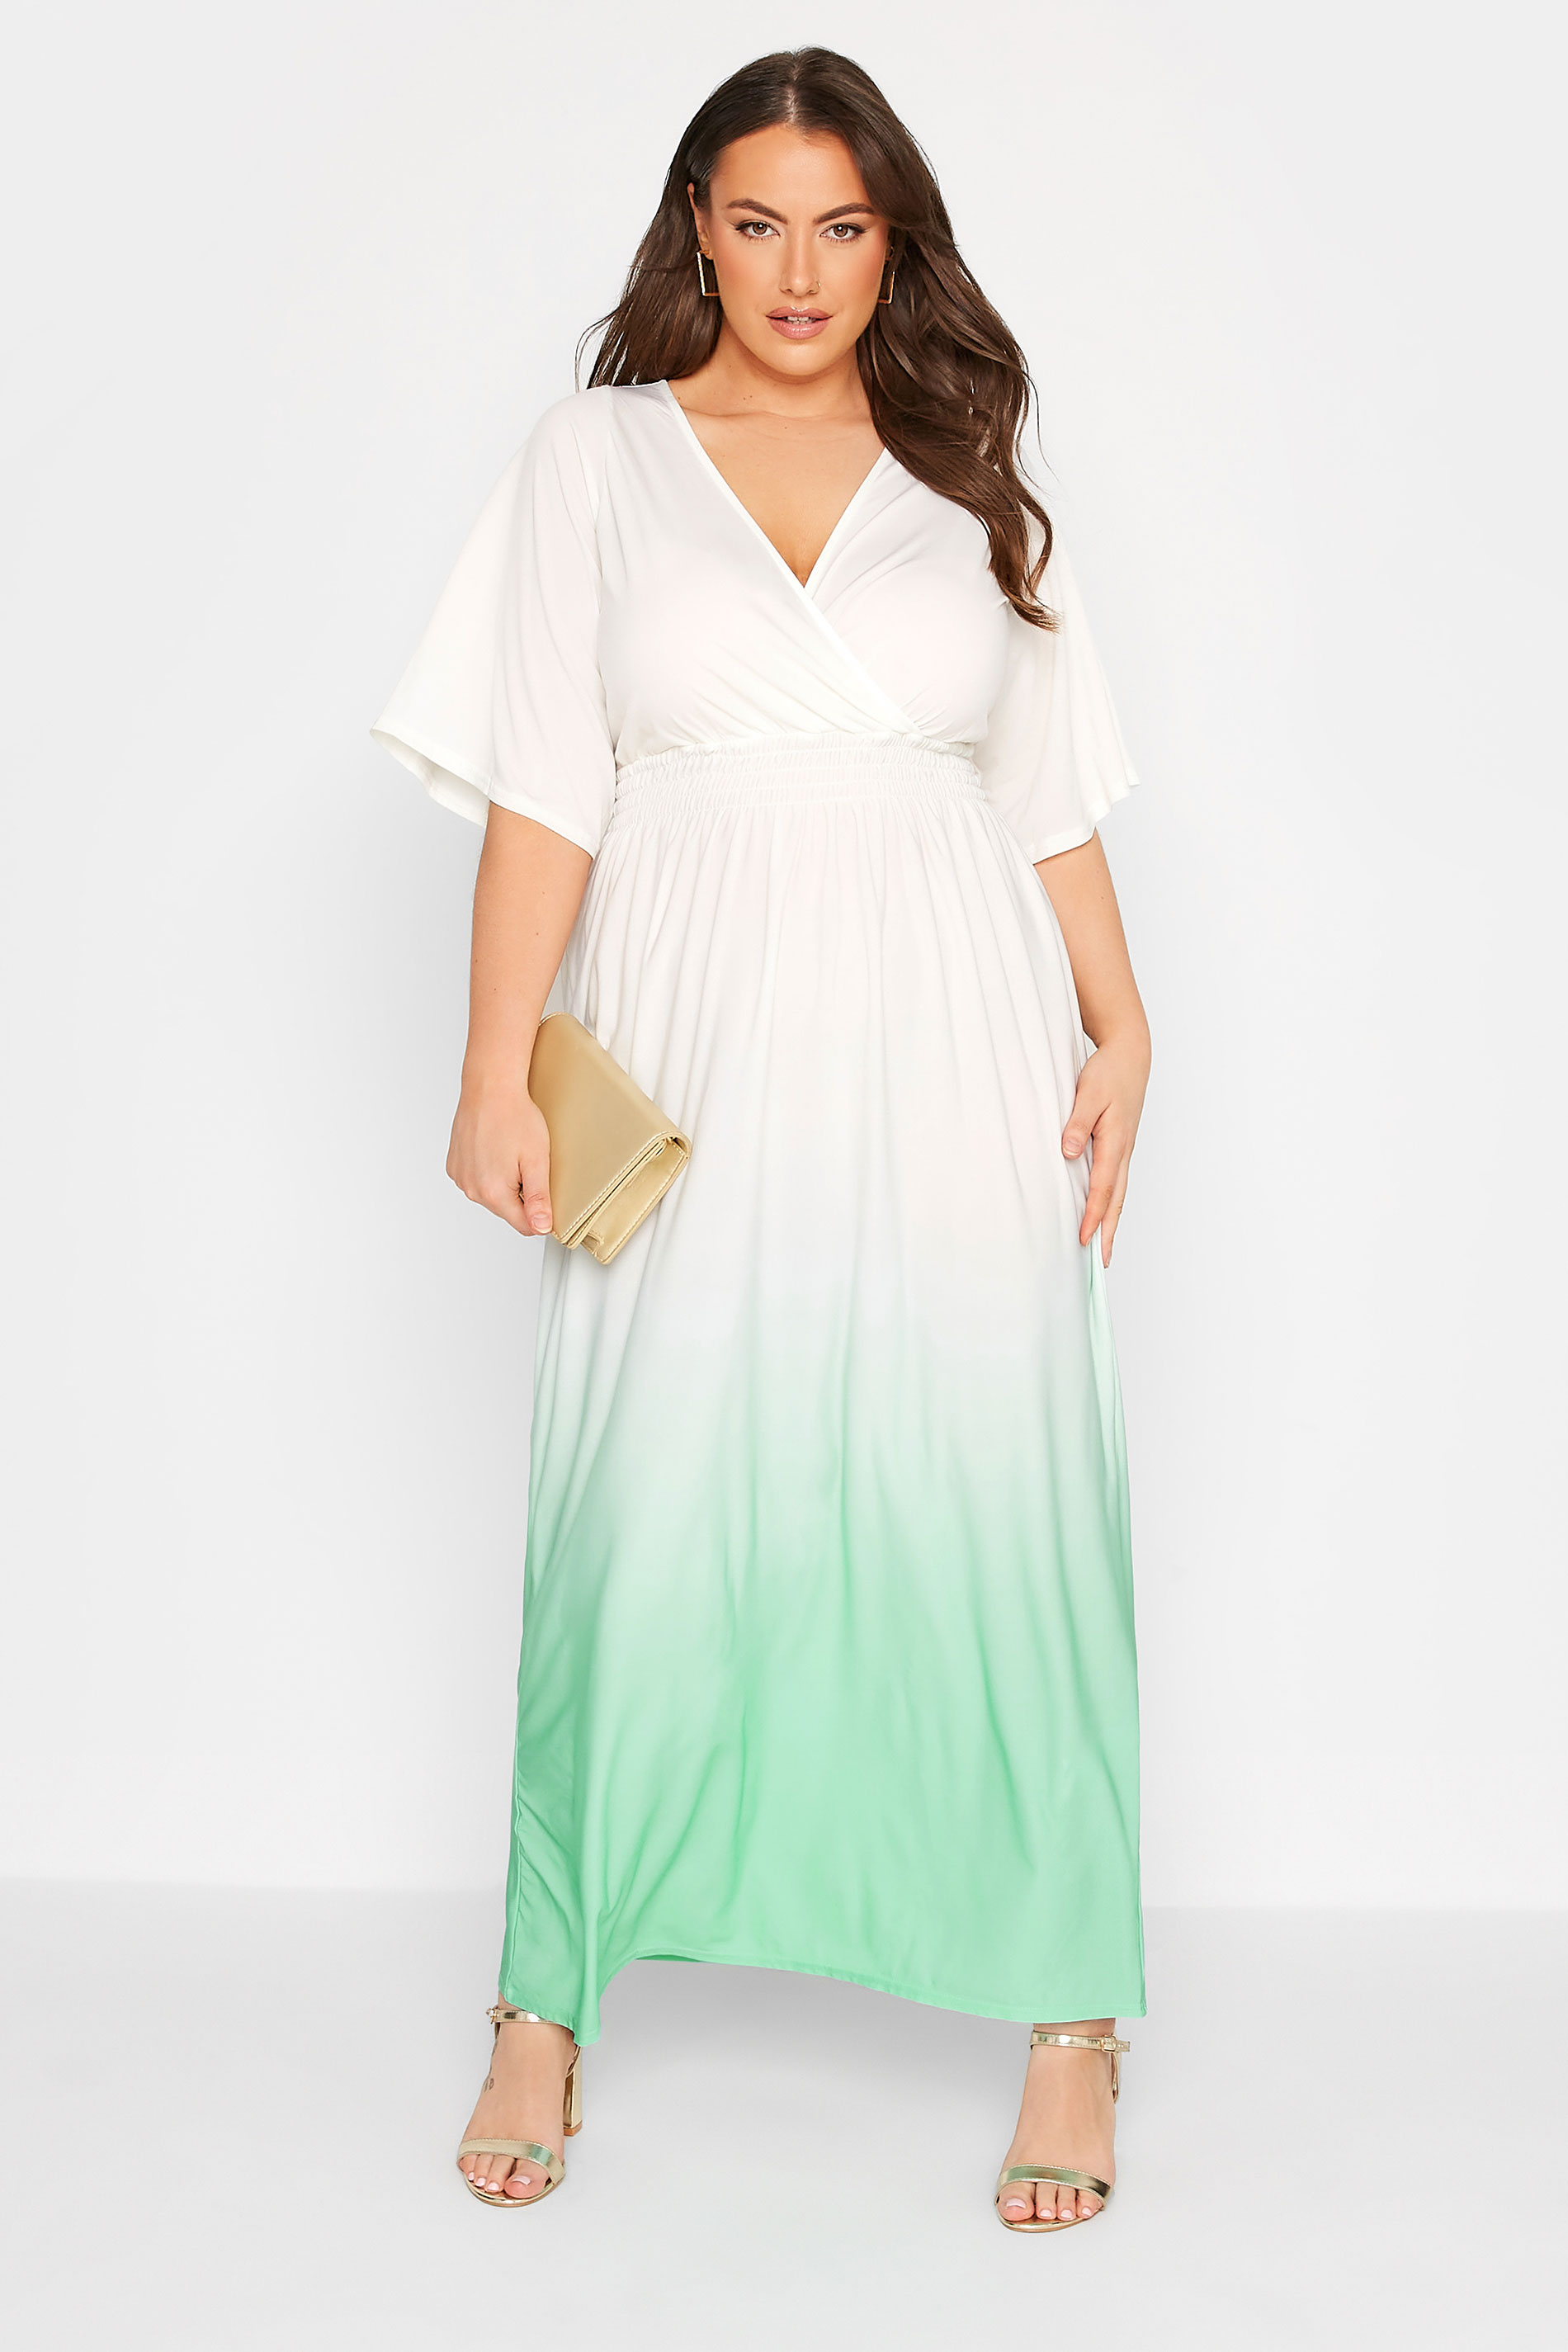 Robes Grande Taille Grande taille  Robes Longues | YOURS LONDON - Robe Blanche Maxi Ombré Vert - KB88977